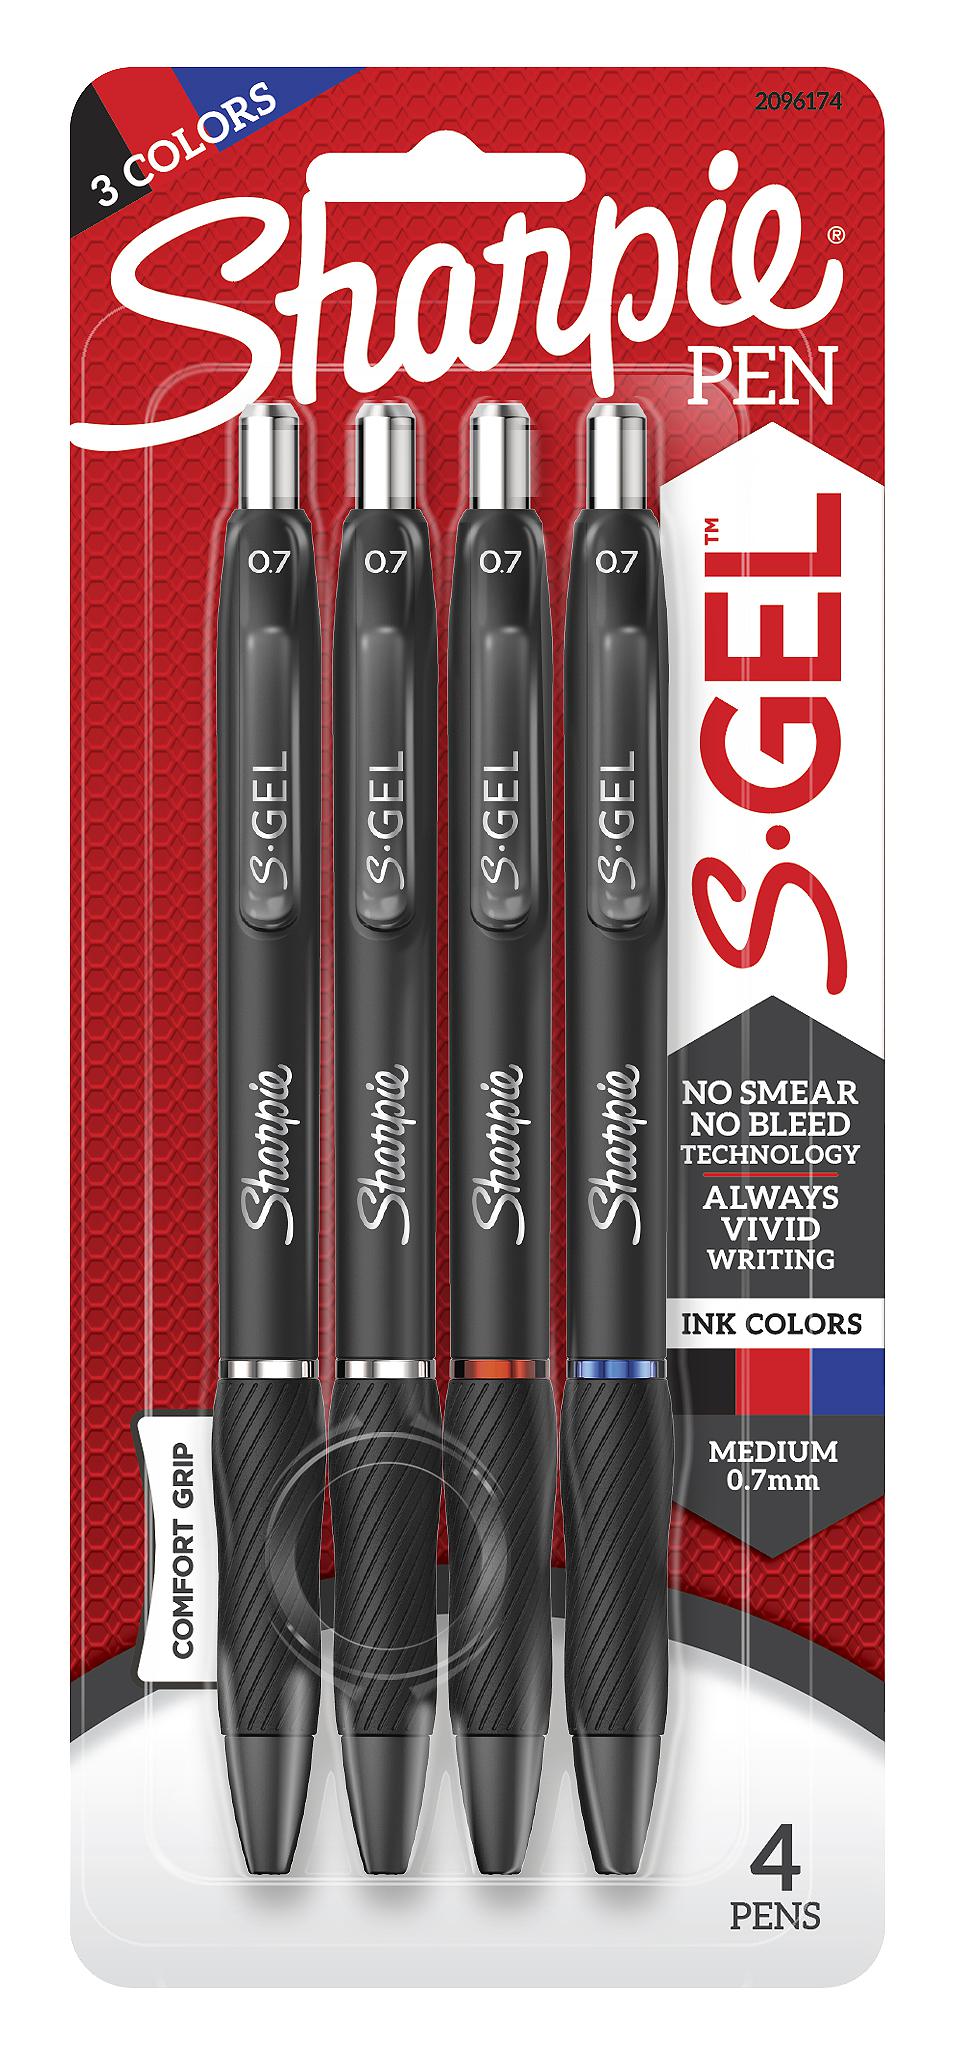 Sharpie Red Chalk Marker Wet Erase Pack of 6Pens and Pencils